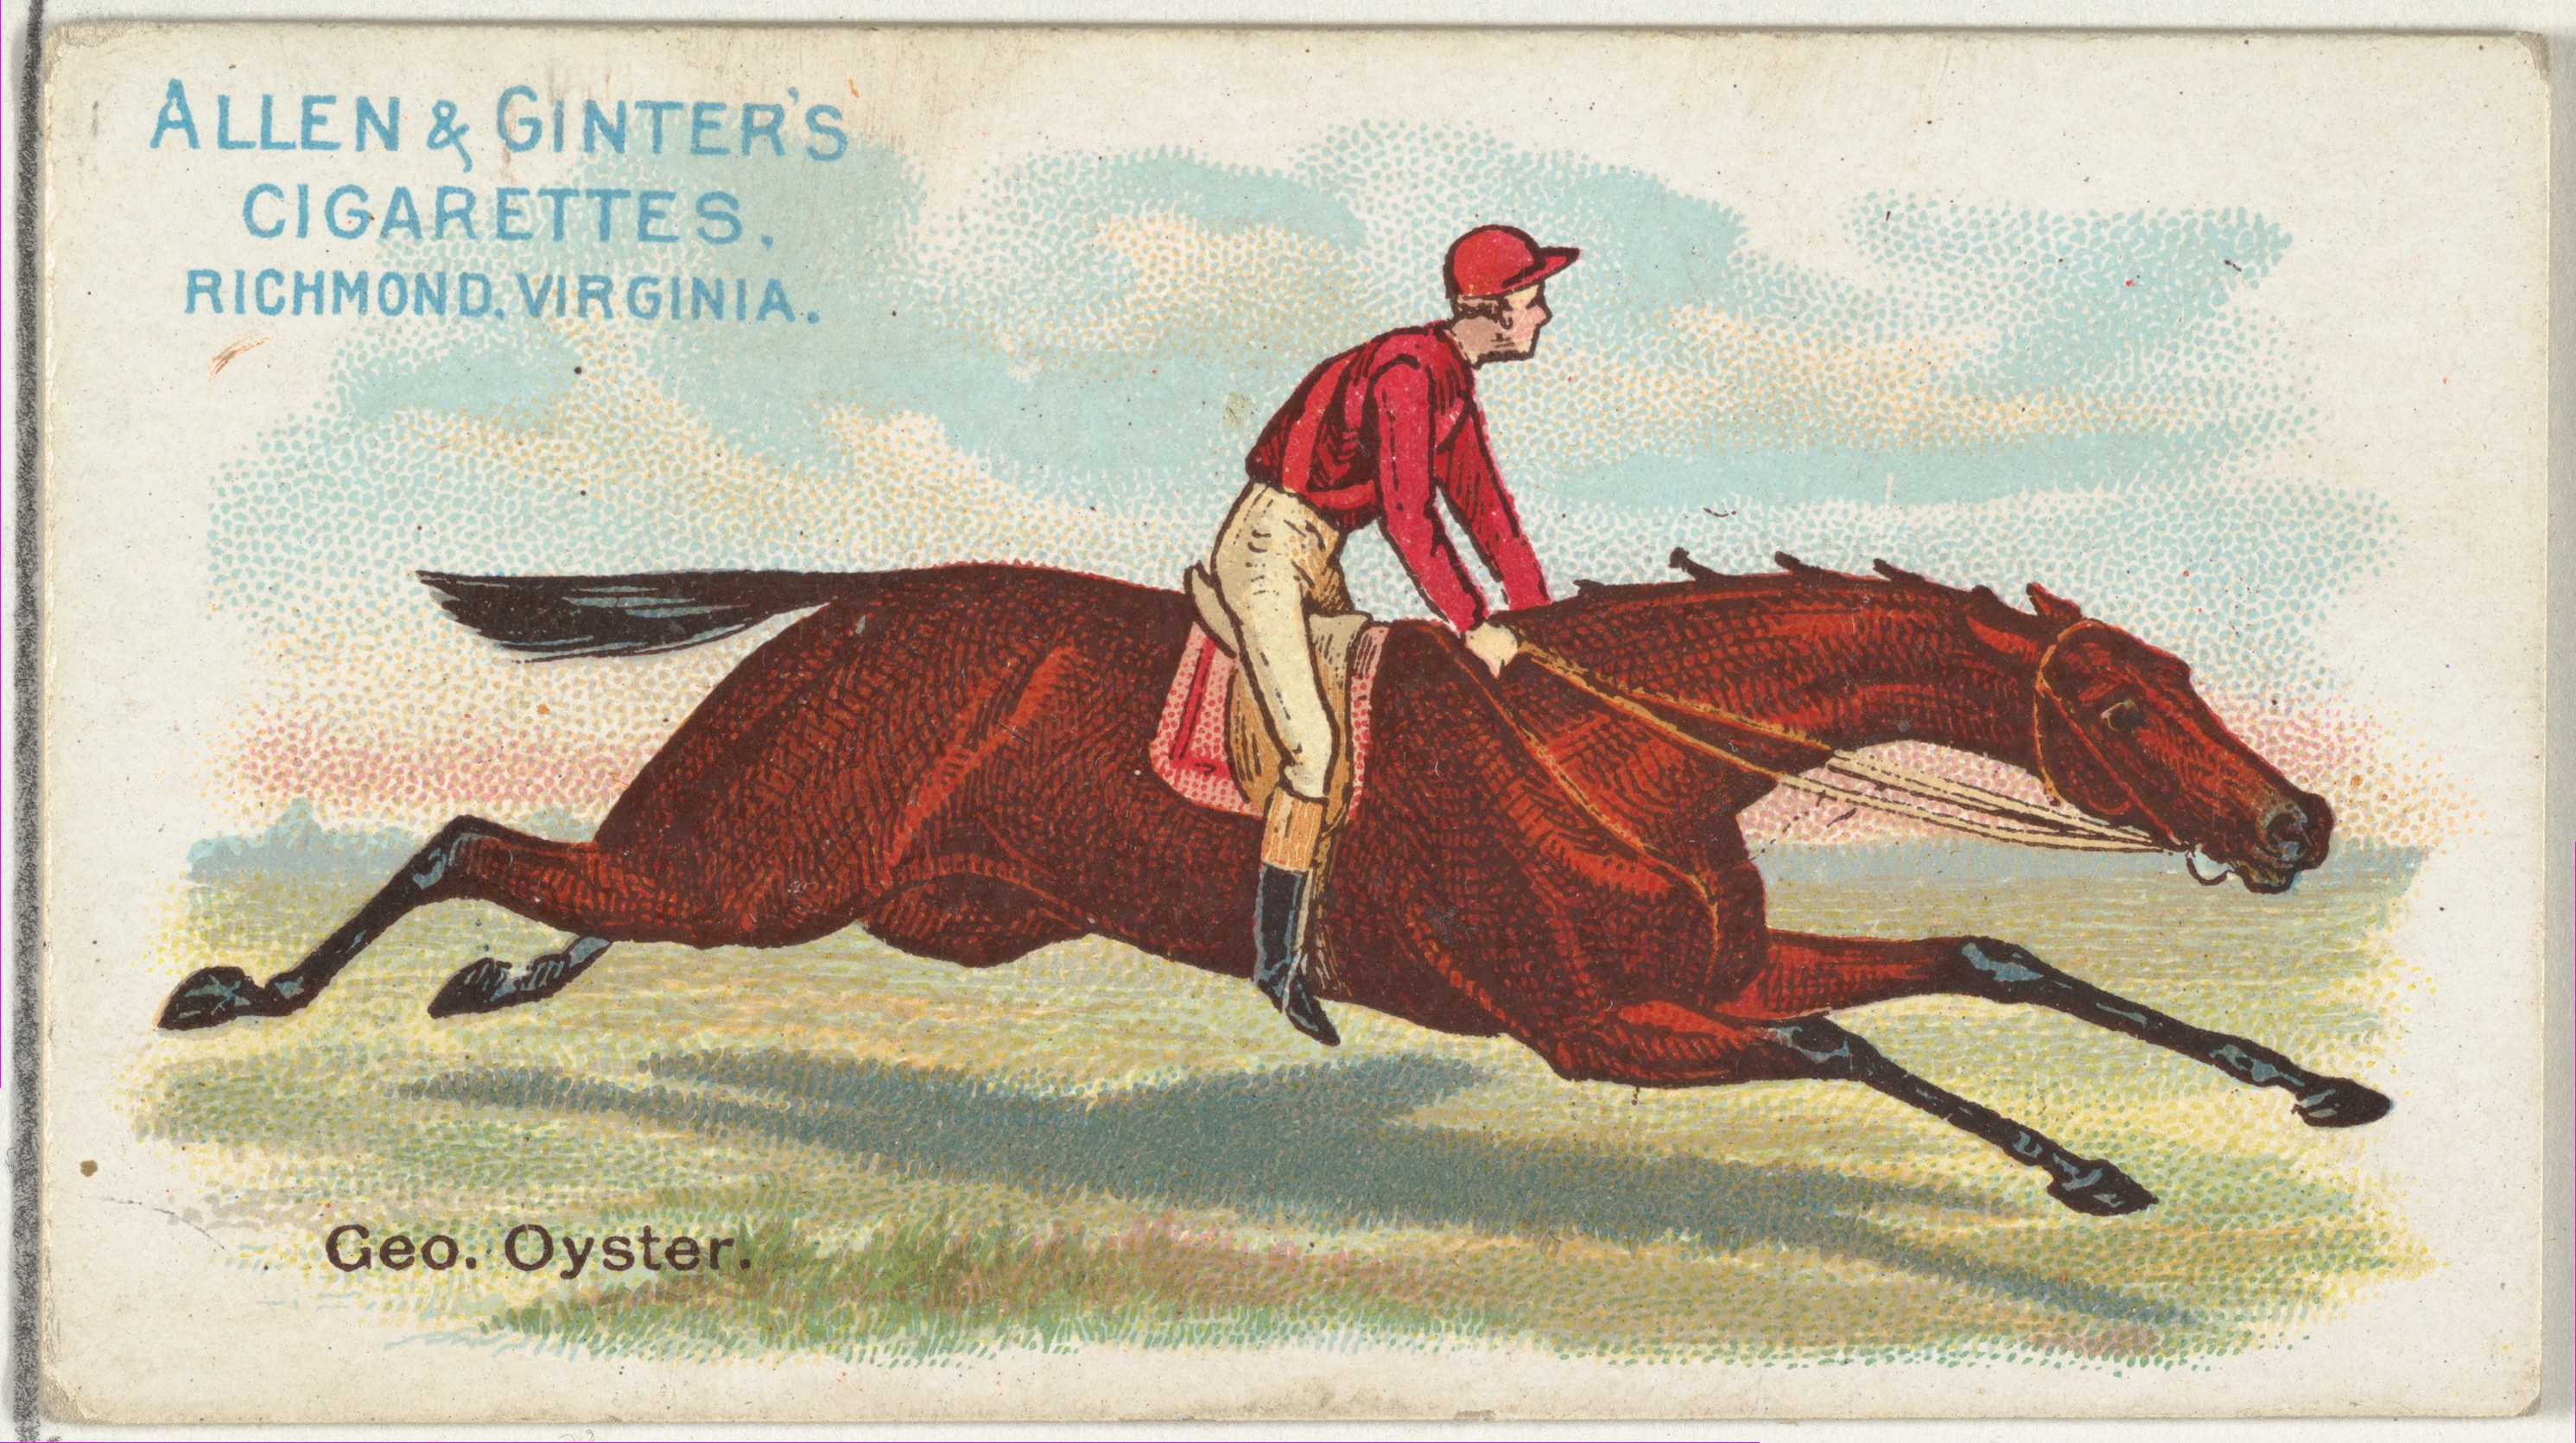 Issued by Allen & Ginter | George Oyster, from The World's Racers ...